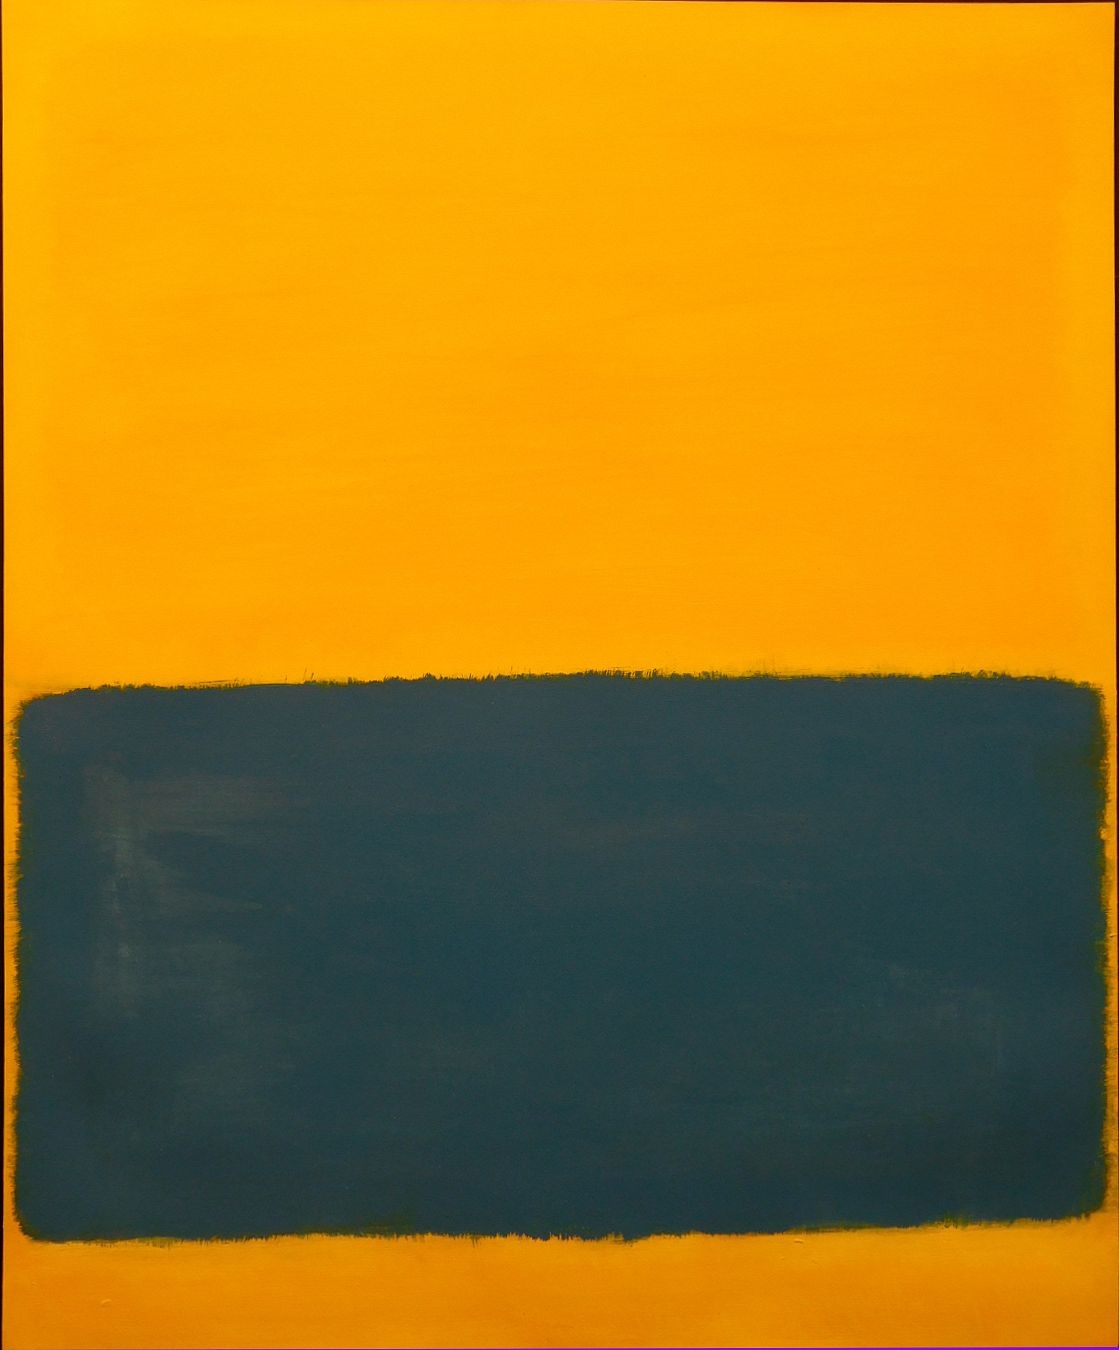 Untitled (Abstract Yellow and Blue) by Mark Rothko